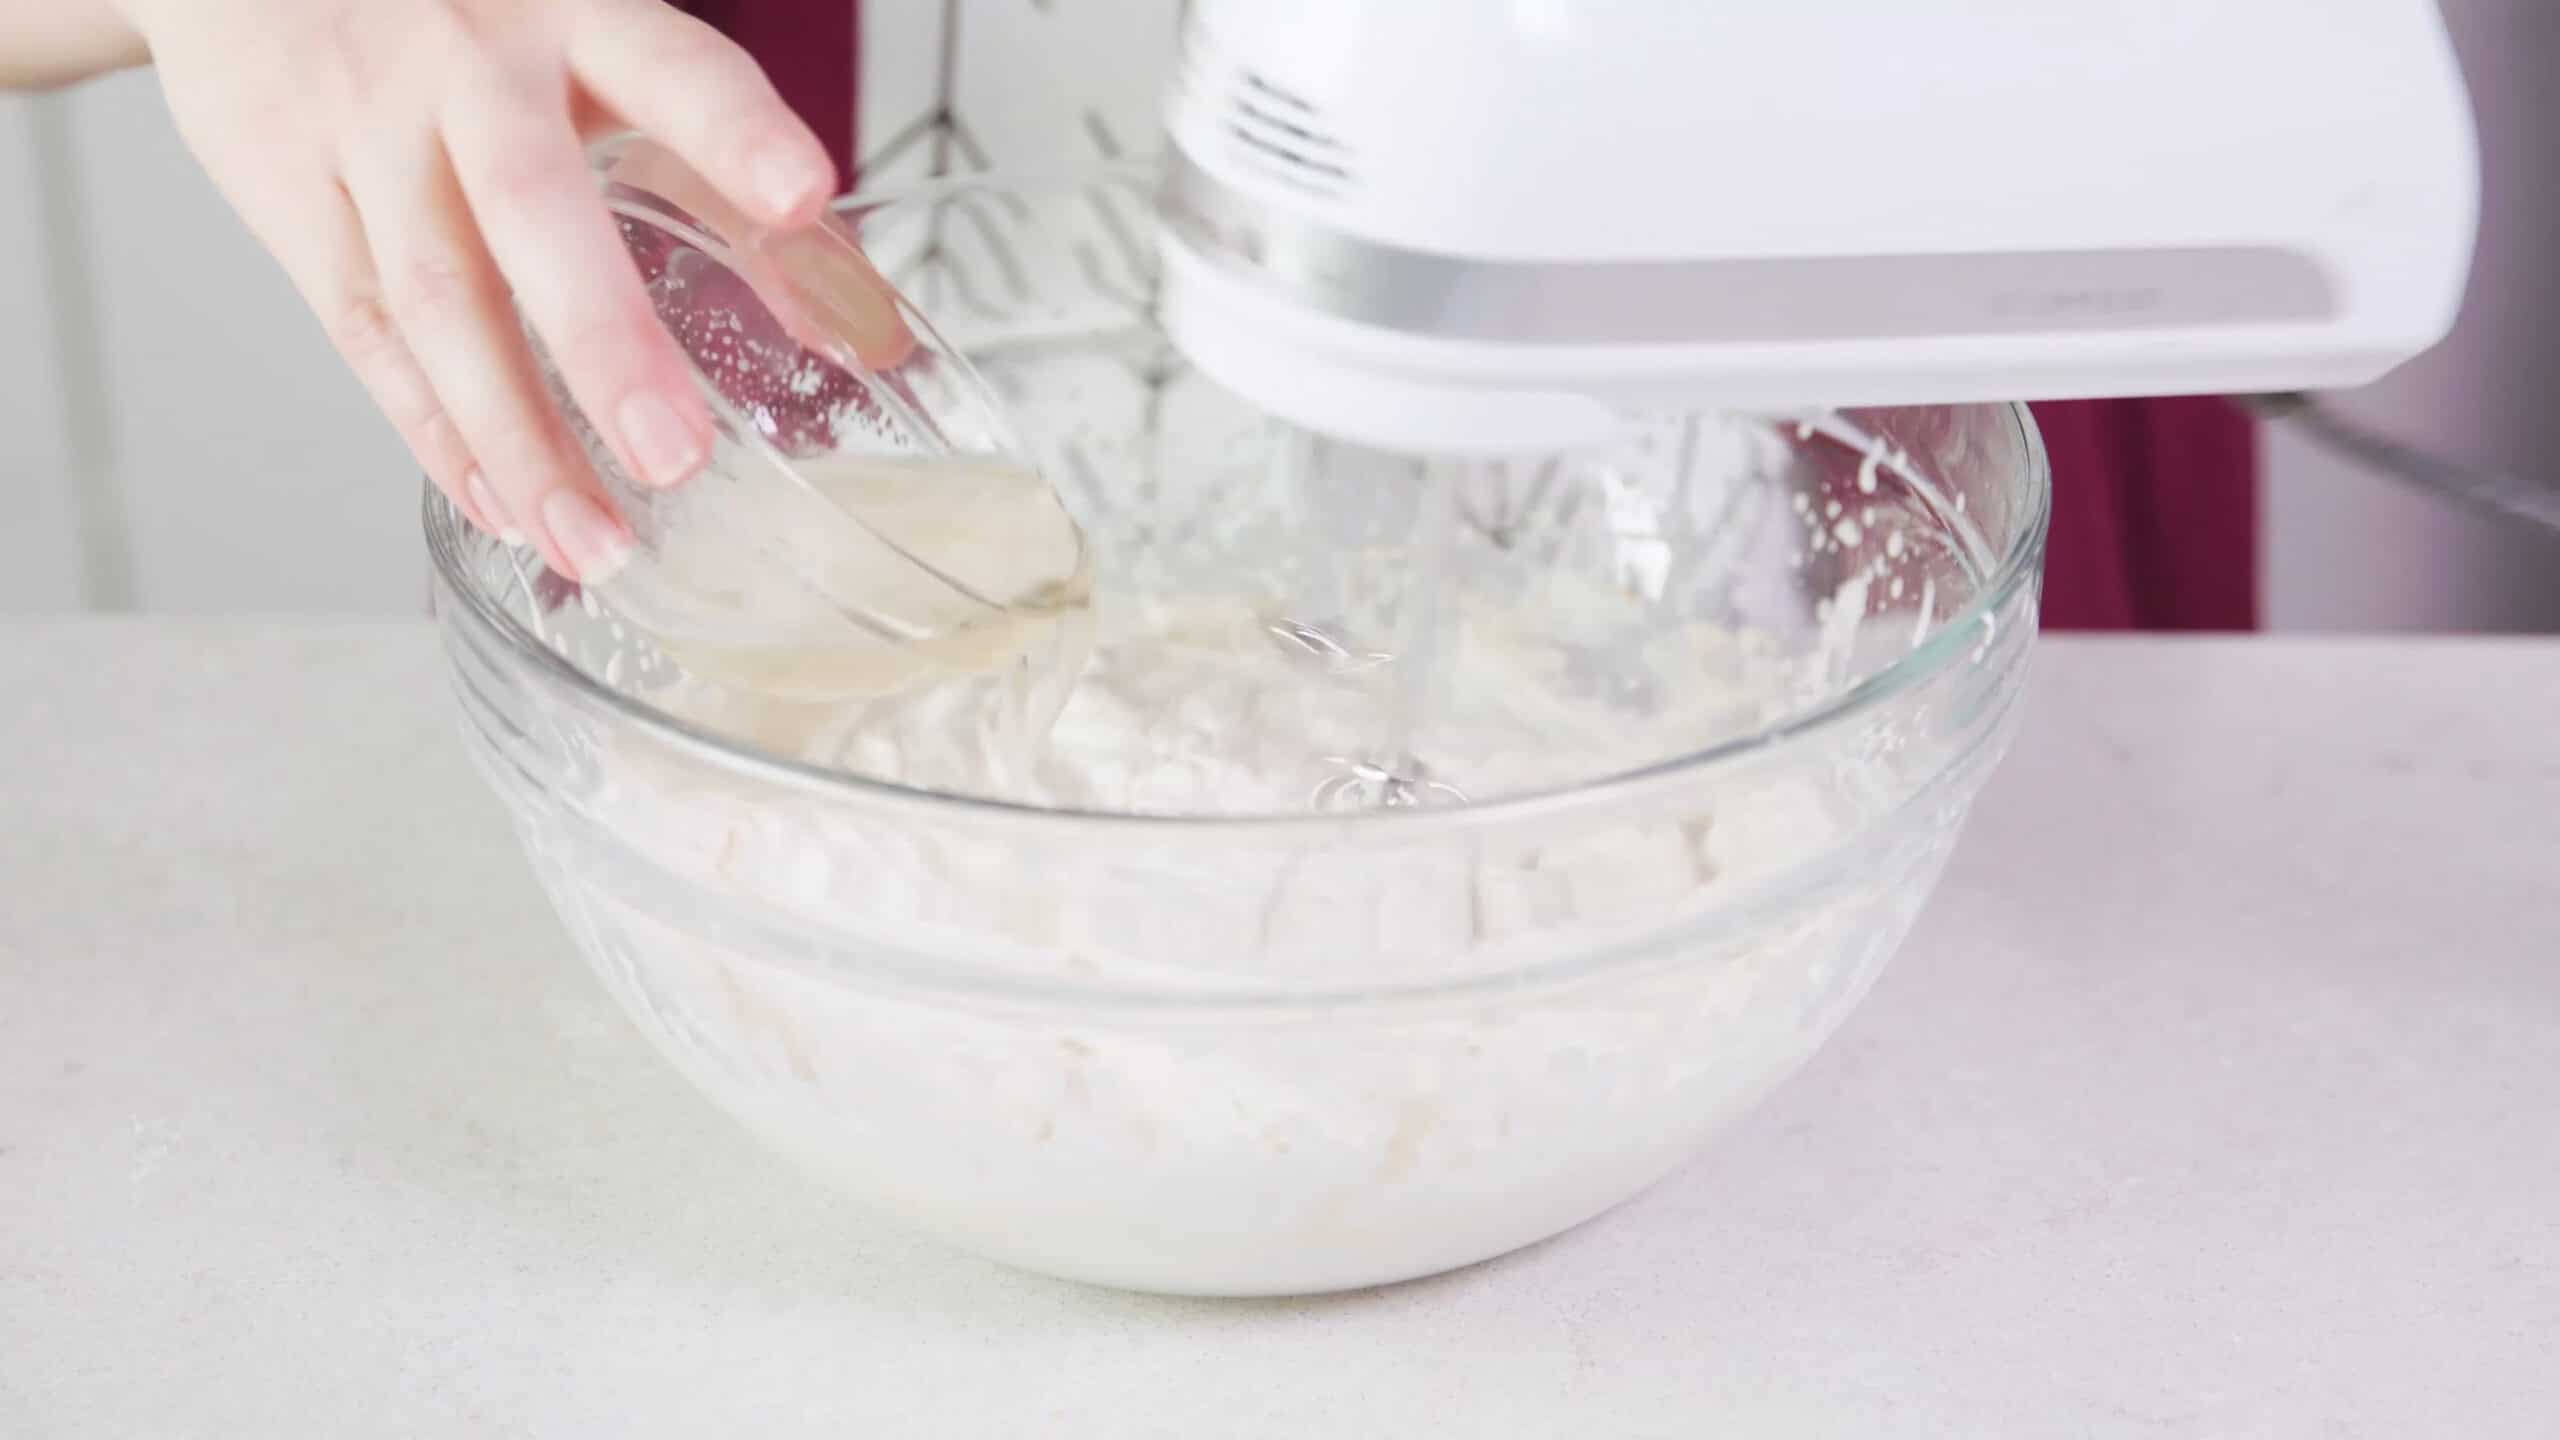 Angled view of large glass mixing bowl filled with whipped cream while pouring from a small glass bowl filled with gelatin being mixed with a hand mixer to stabilize the whipping cream.